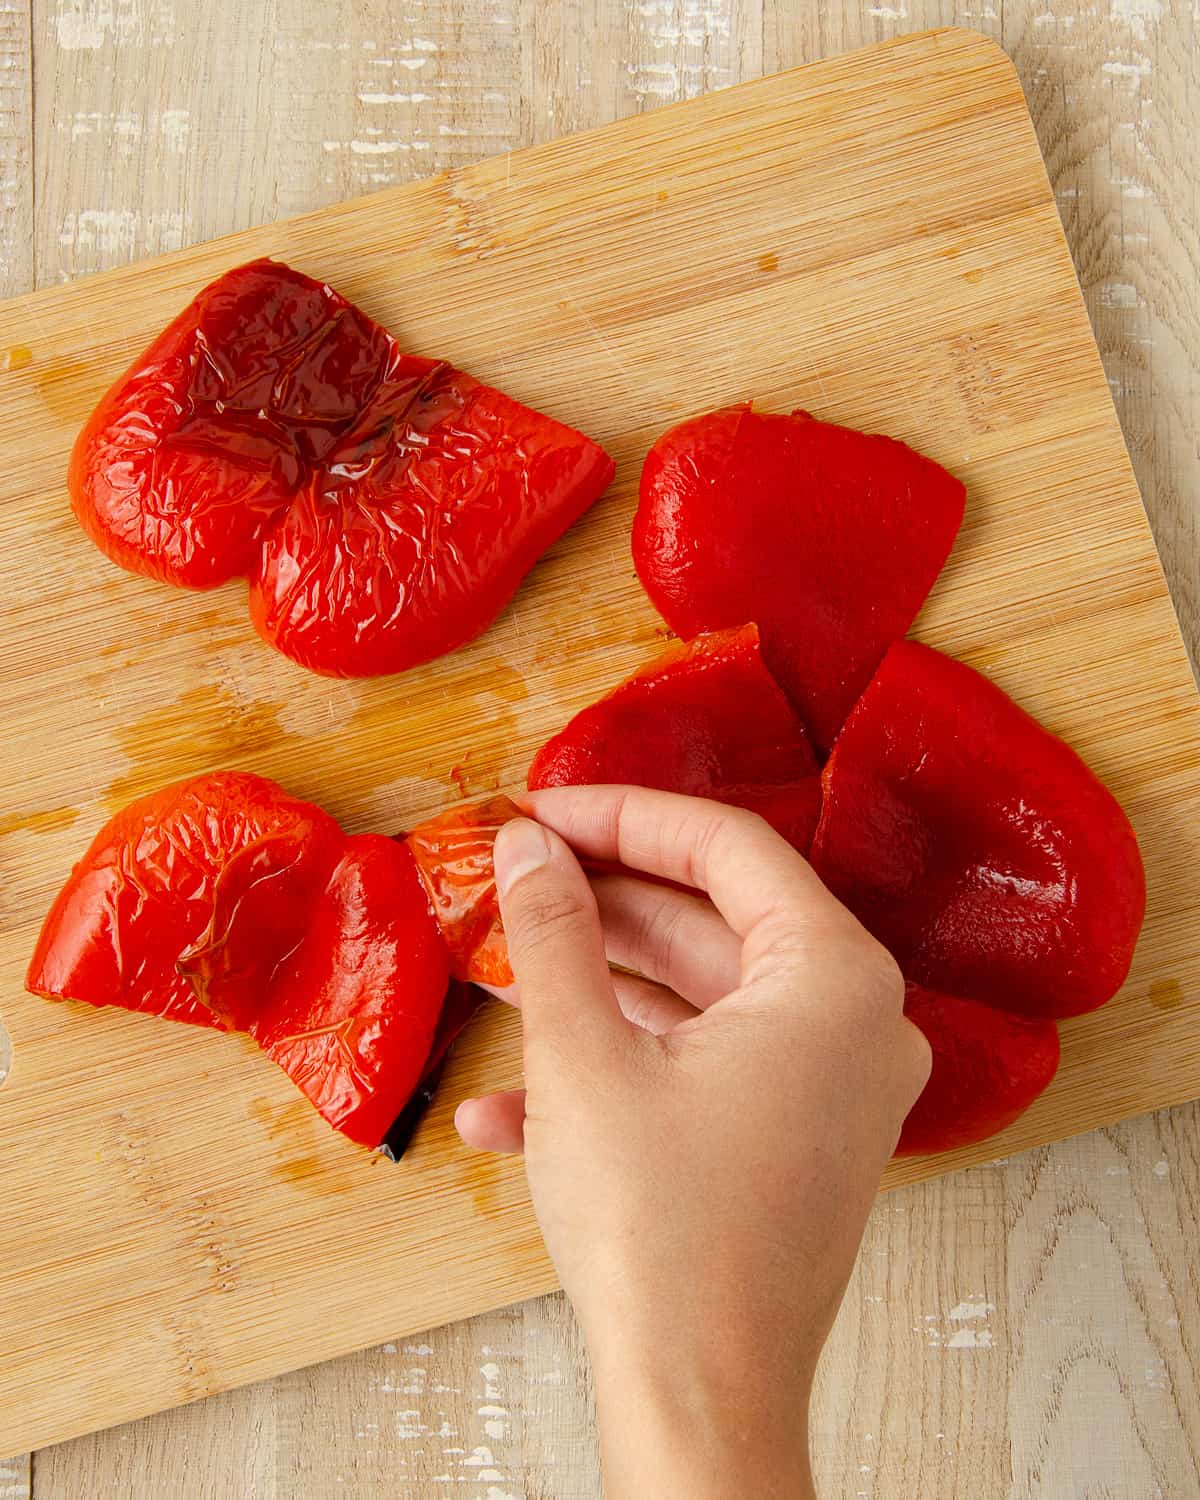 Peeling the skins off of a red bell pepper.